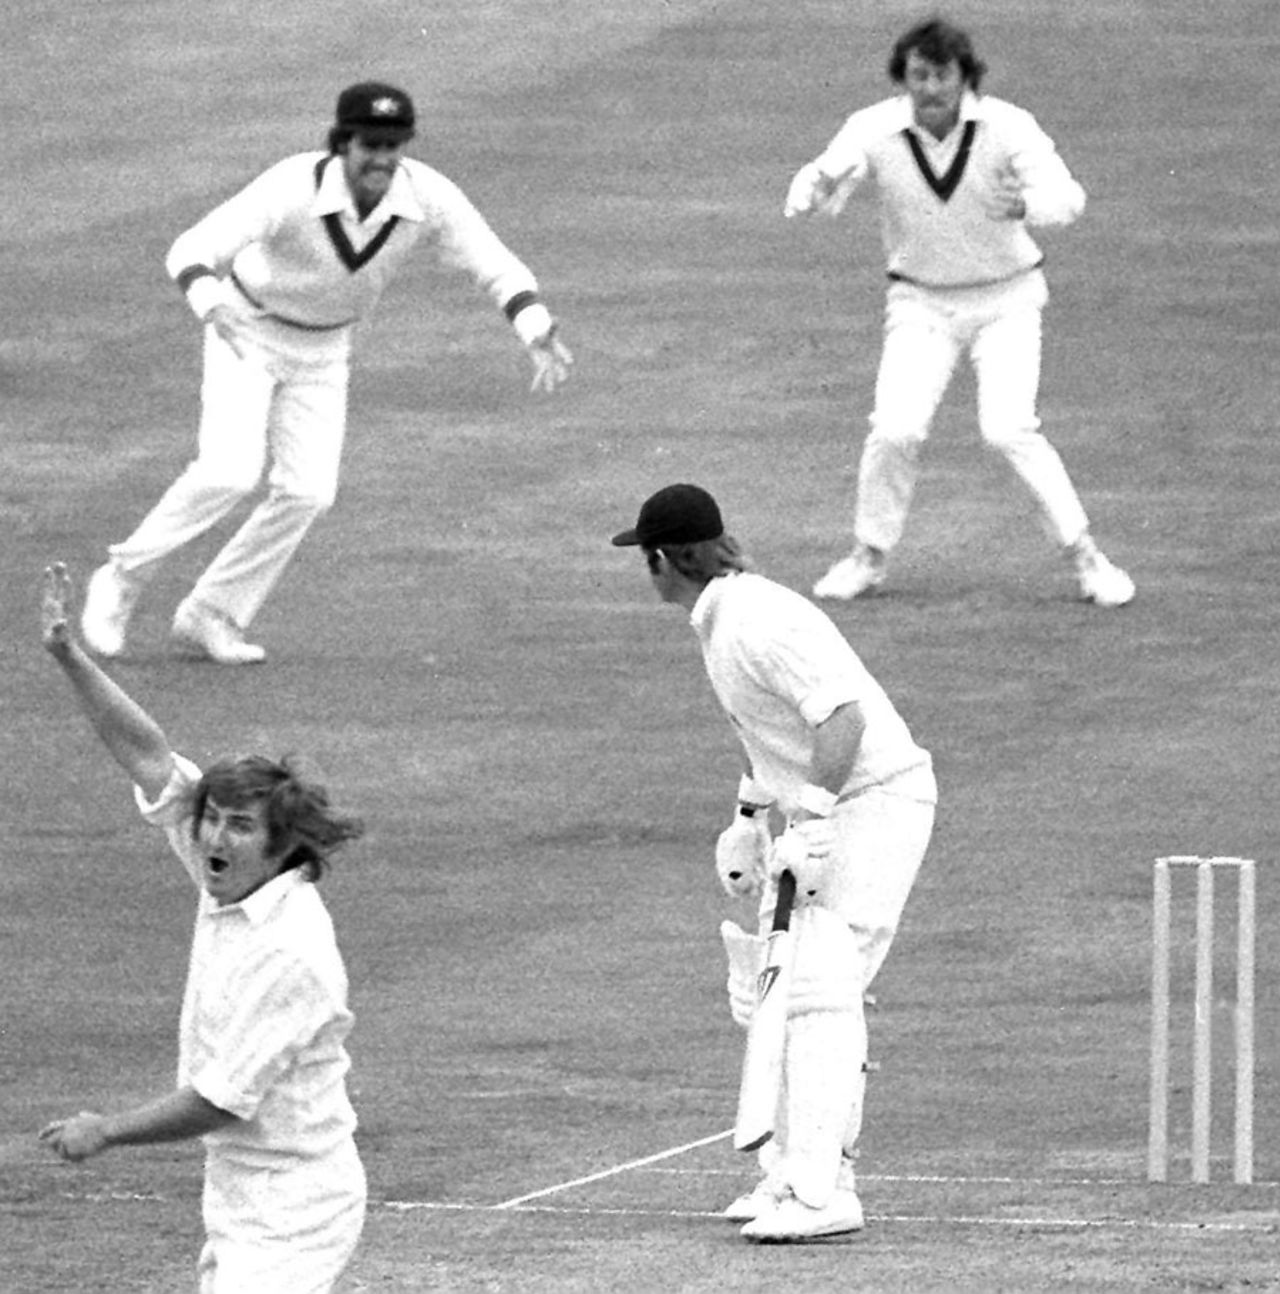 Dennis Amiss is trapped lbw by Gary Gilmour, England v Australia, World Cup semi-final, Leeds, June 18, 1975